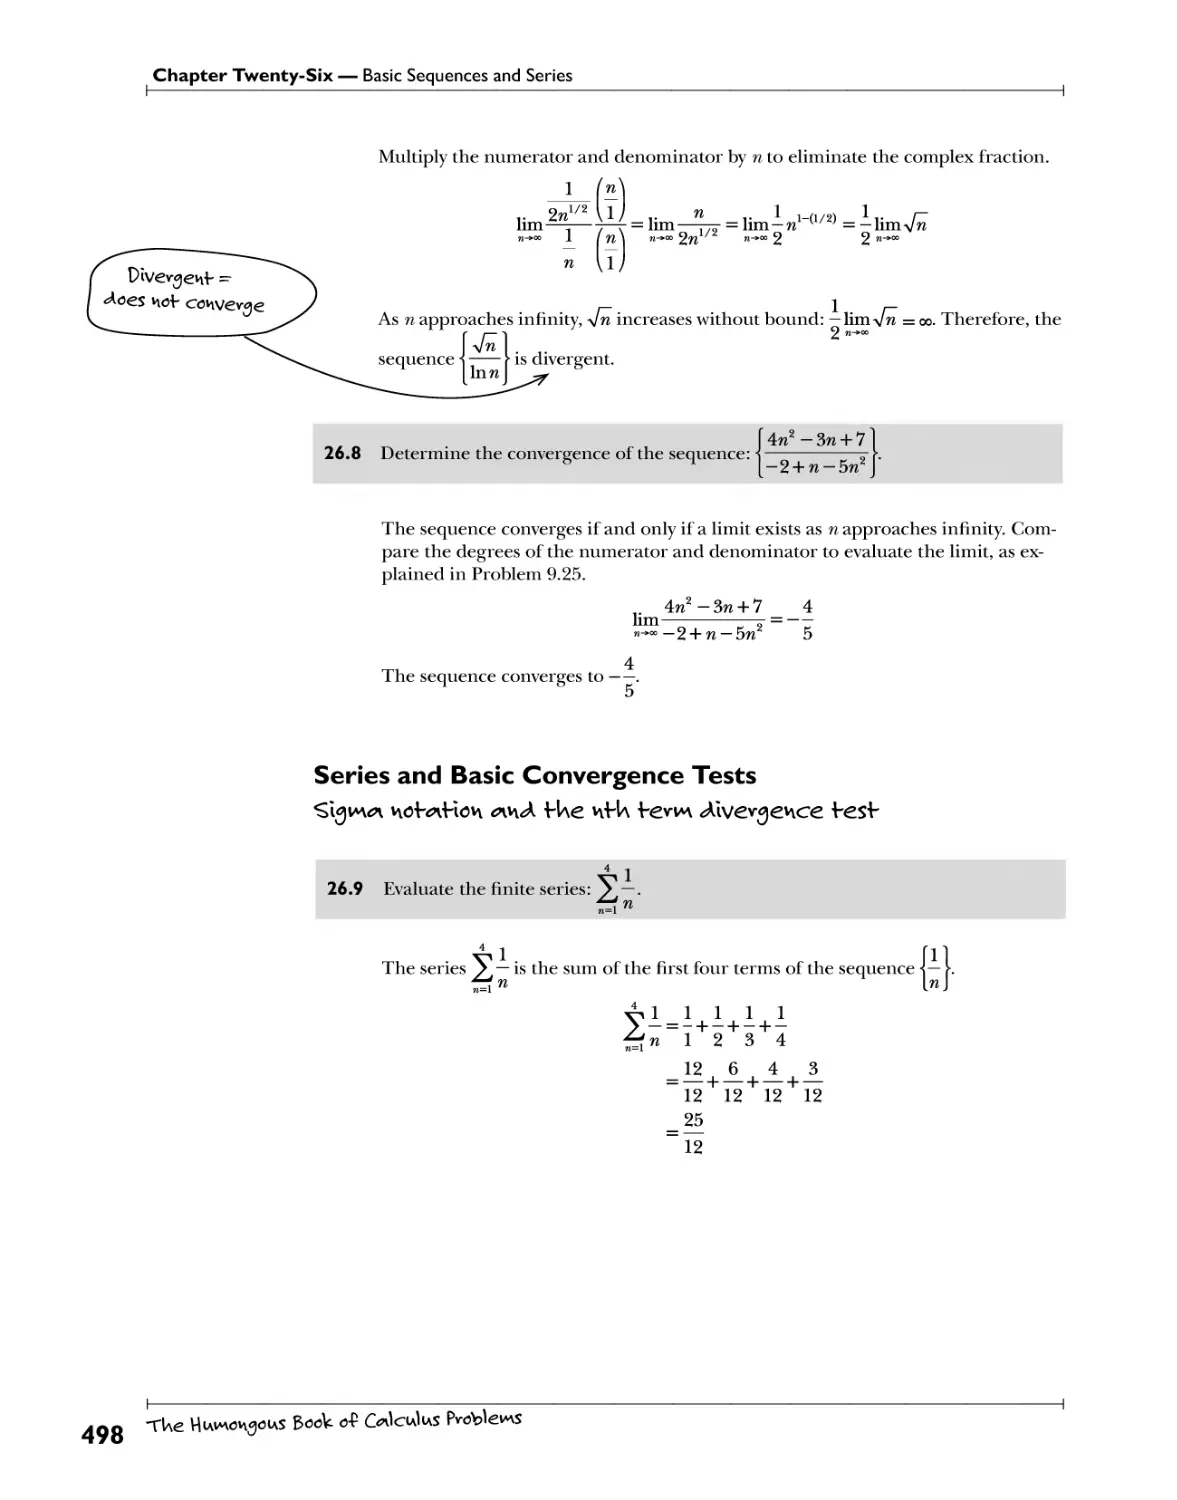 Series and Basic Convergence Tests 498